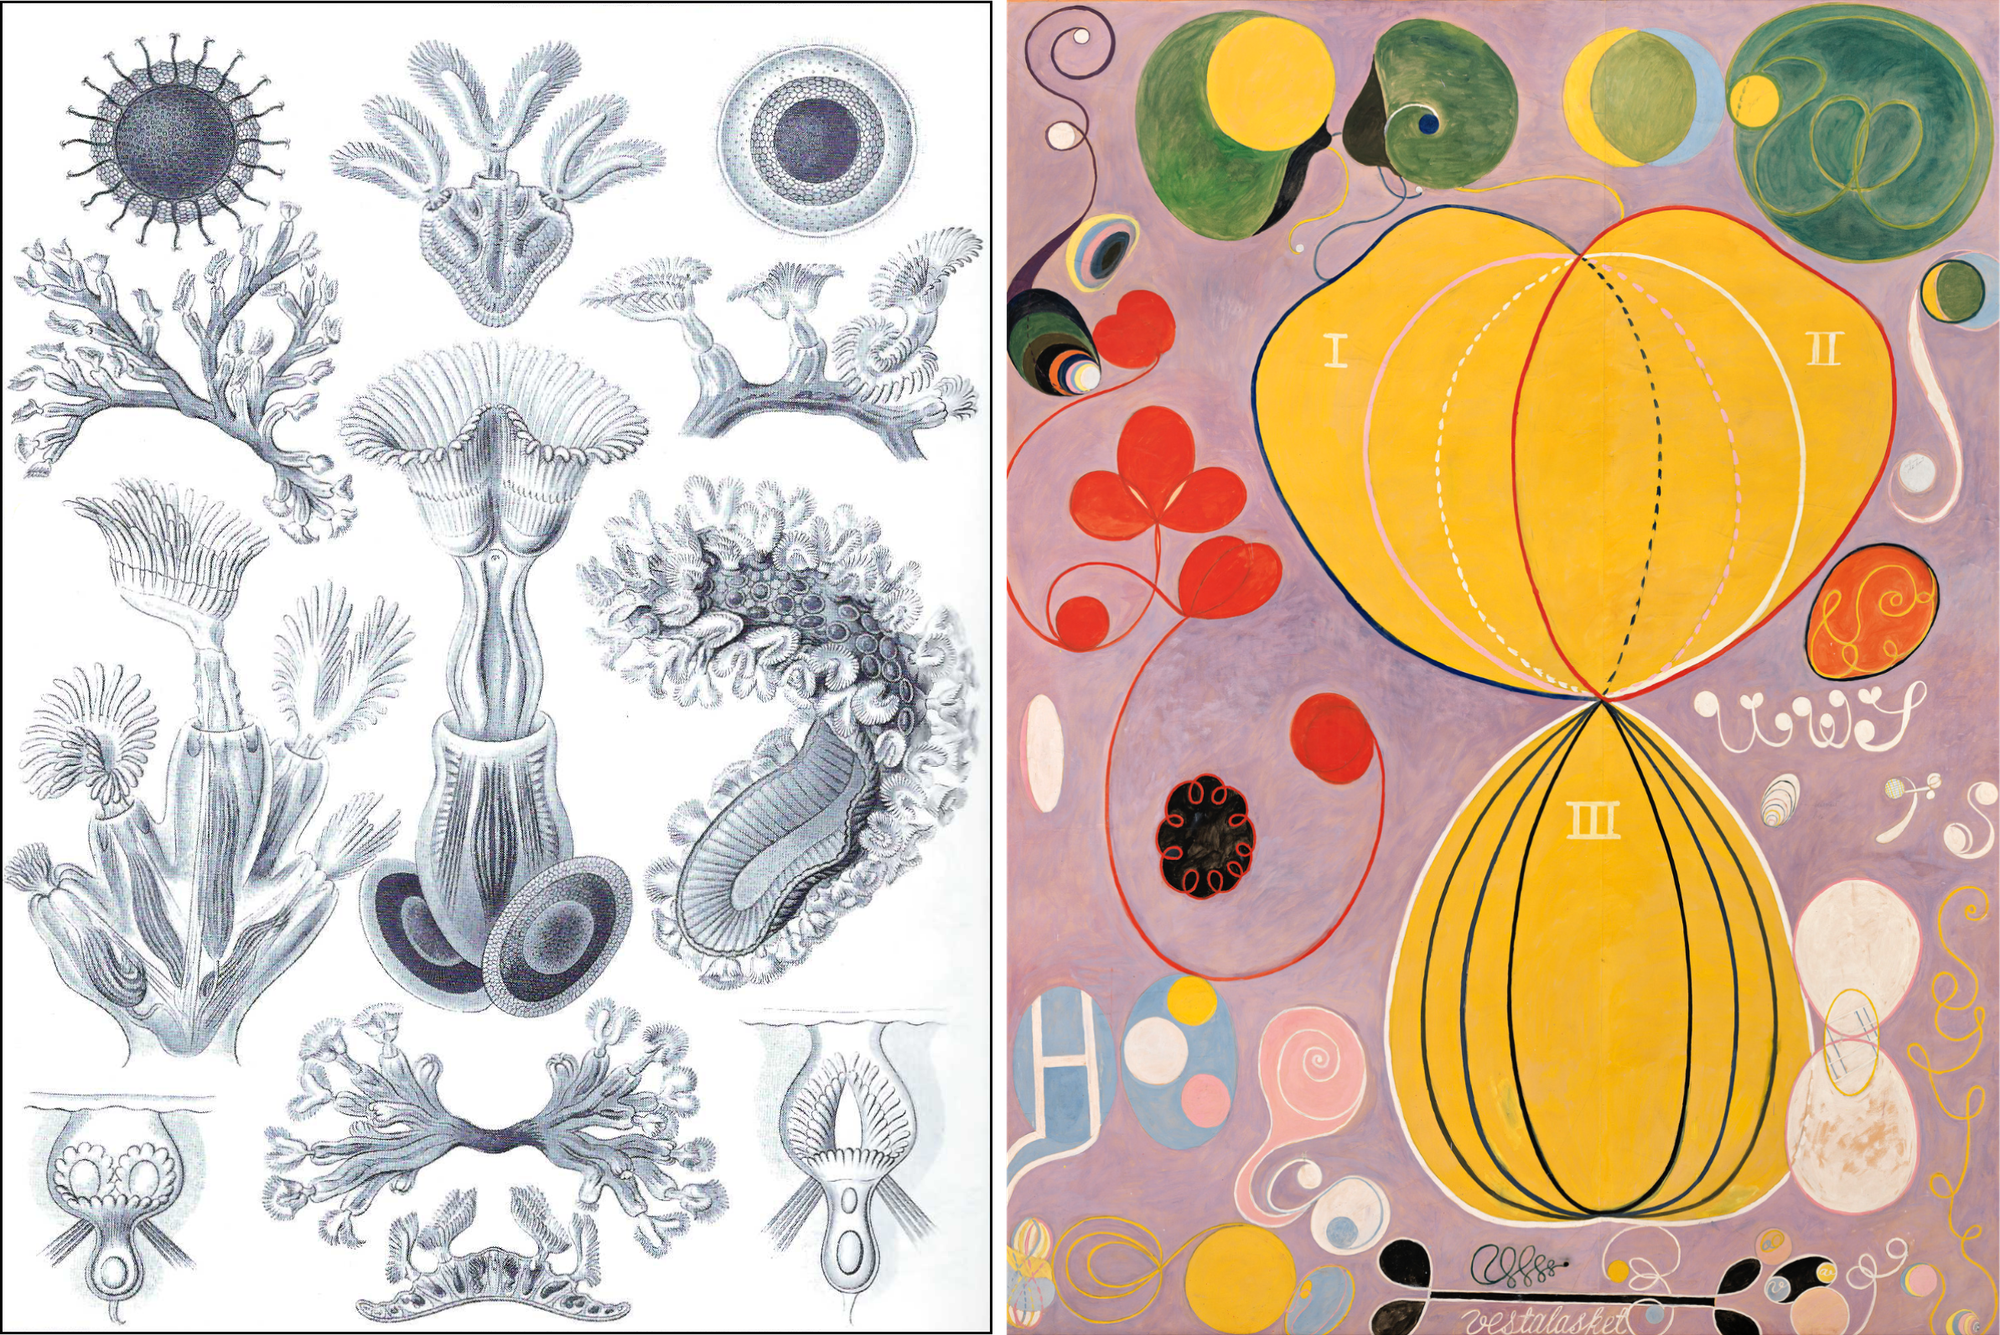 On left, Ernst Haeckel lithographic plate of moss animals; on right, biomorphic forms and shapes in different colors on mauve background, by Hilma af Klint